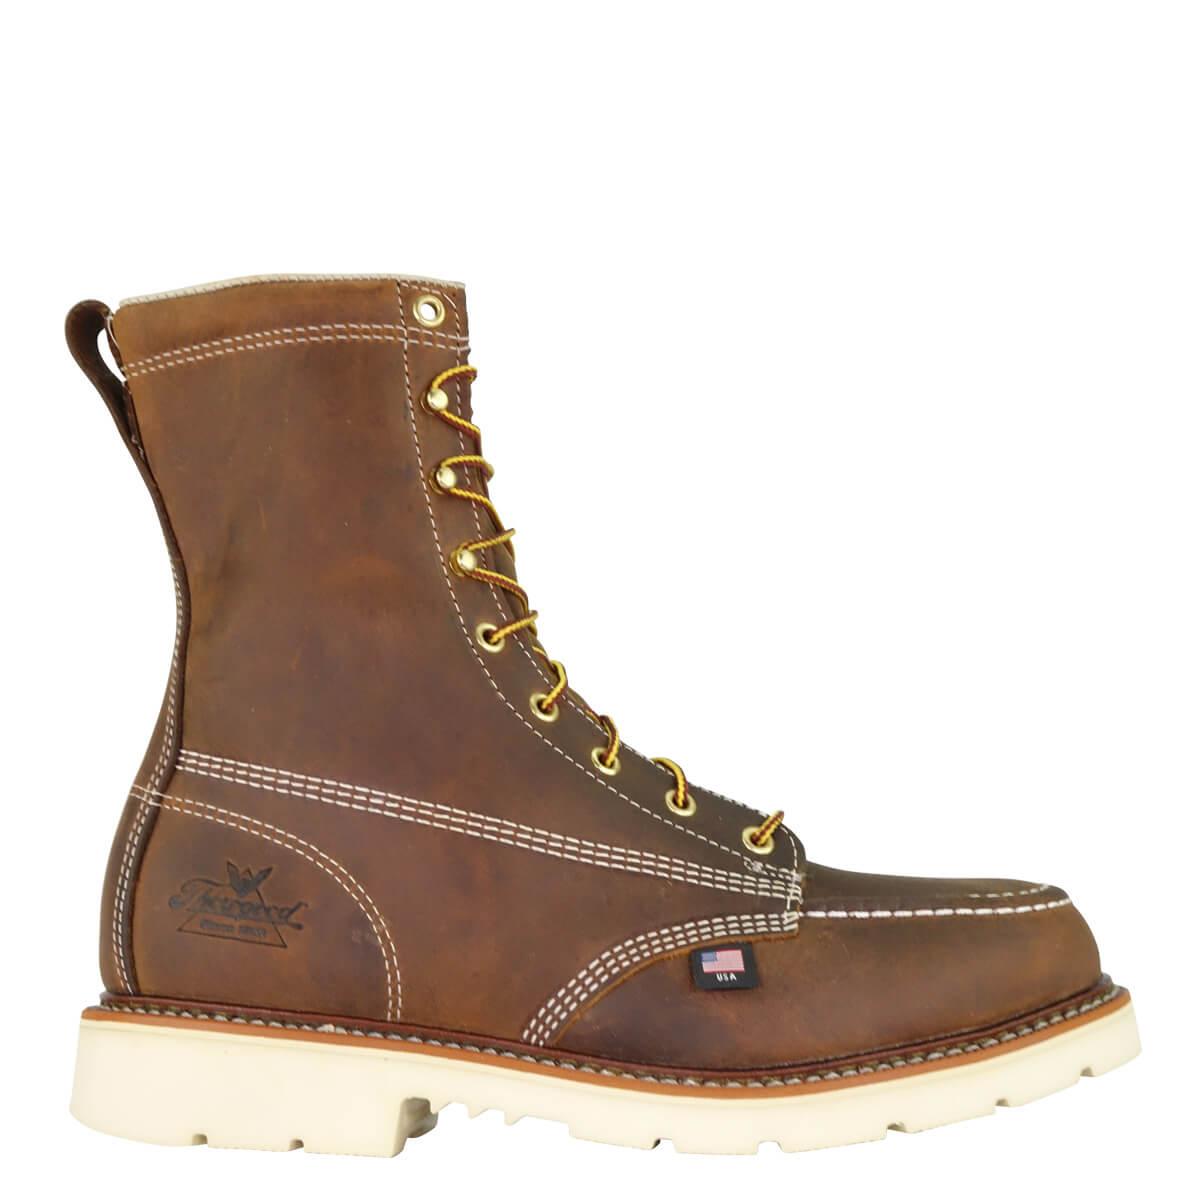 American Heritage - 8" Trail Crazyhorse - Moc Toe MAXwear 90 (Steel Toe) - Purpose-Built / Home of the Trades